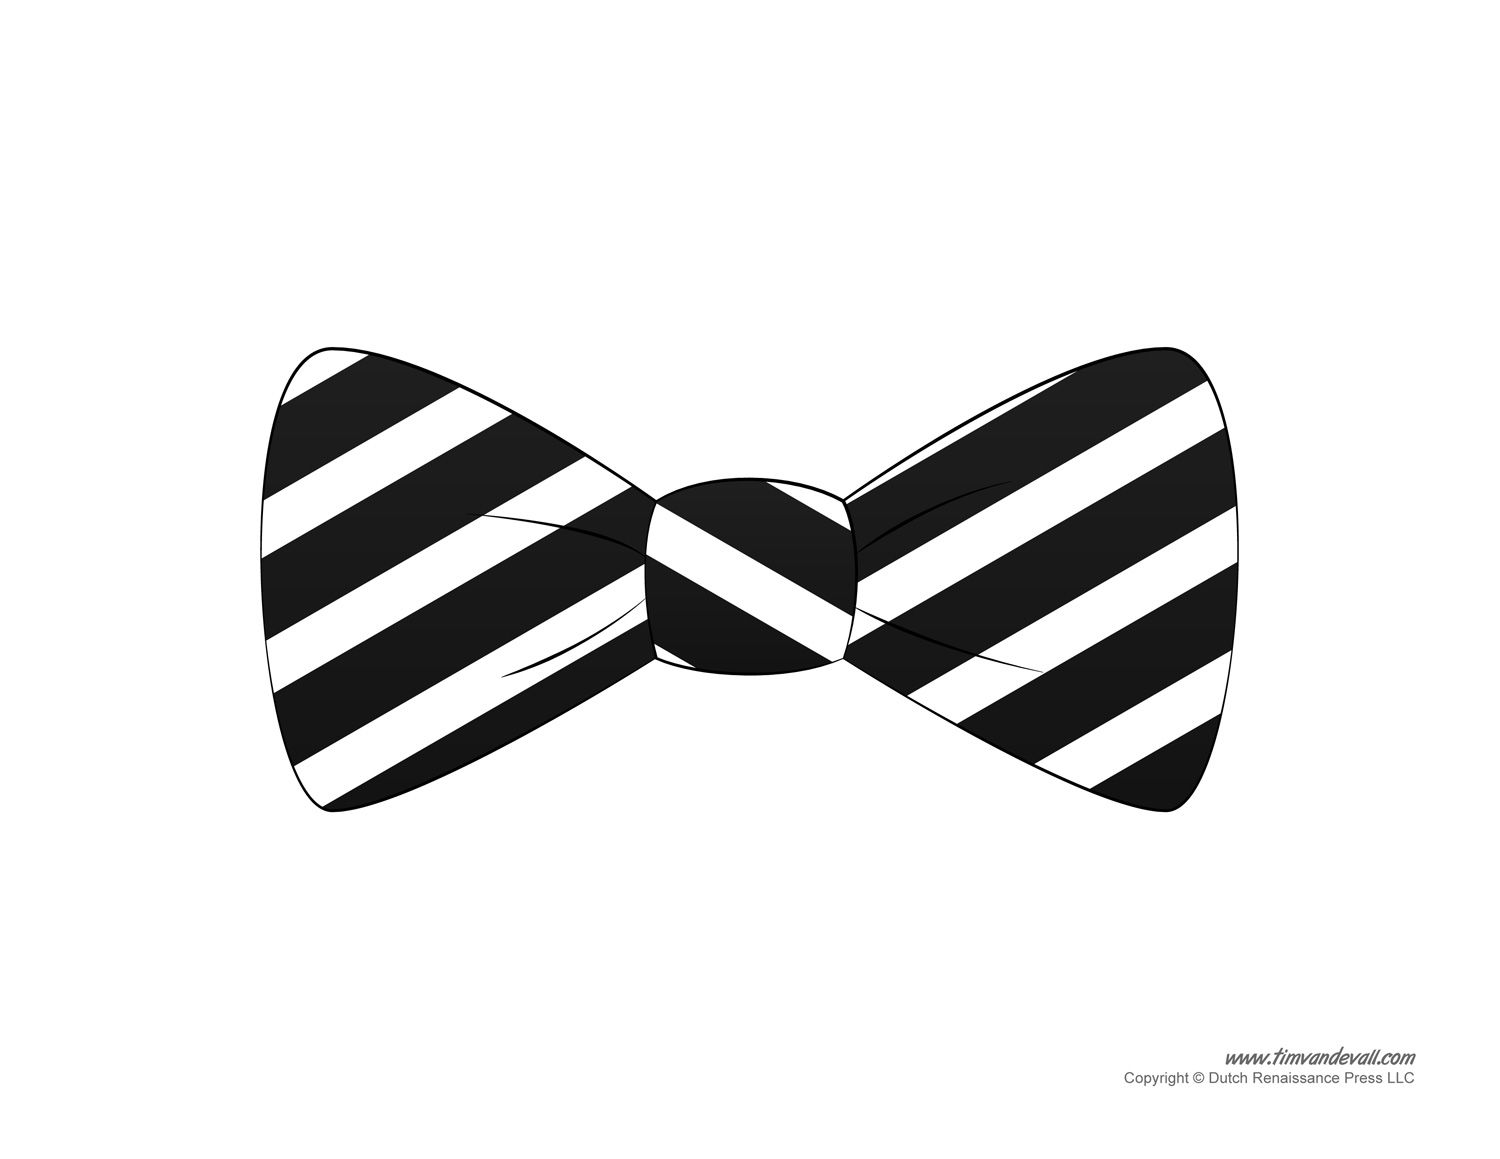 Bow tie black and. Bows clipart necktie